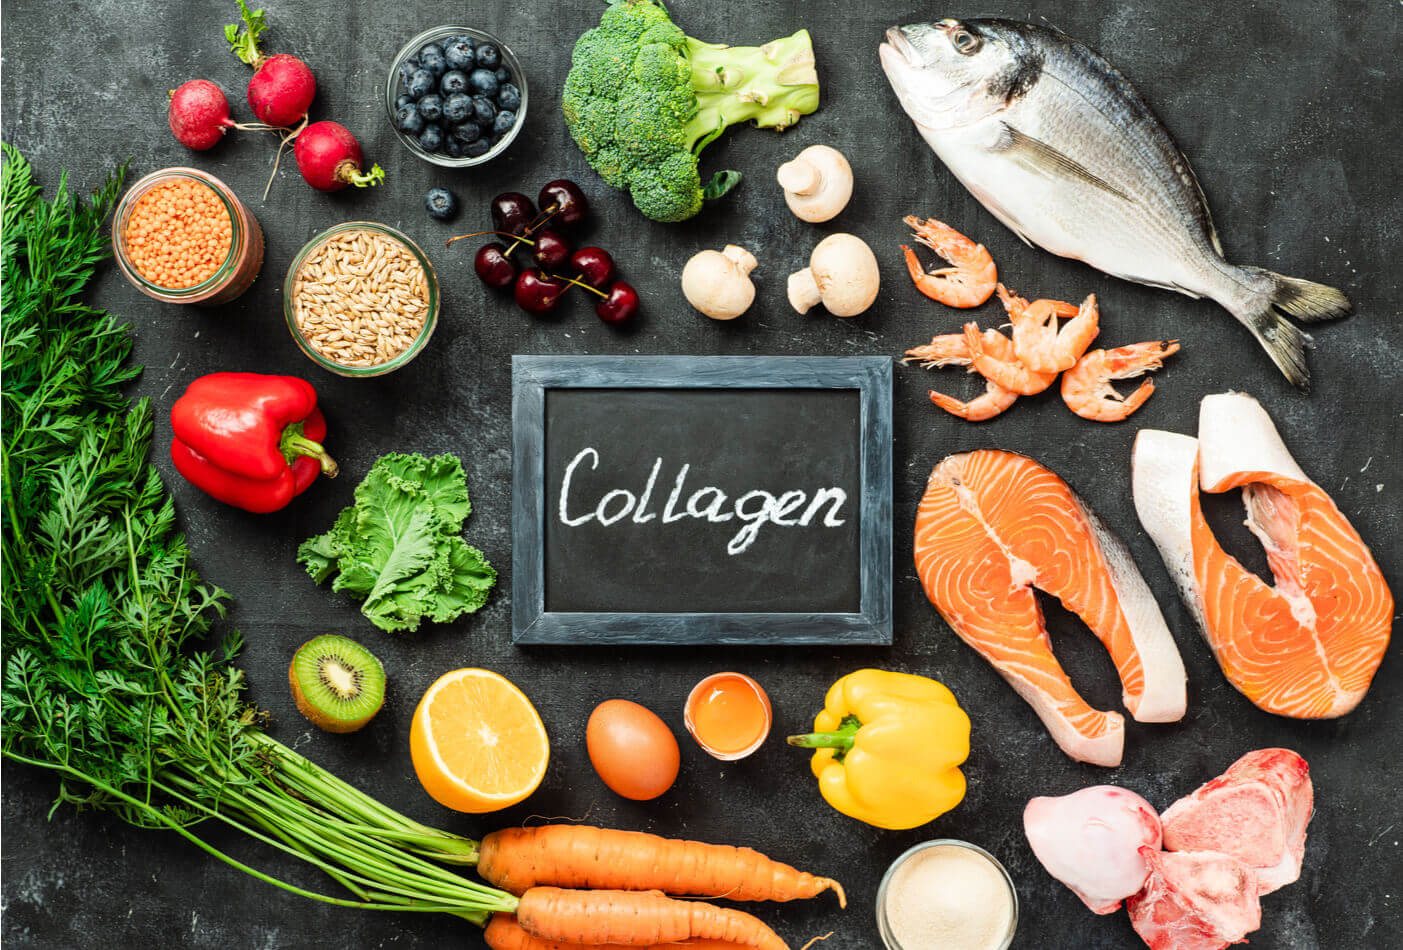 Food sources of collagen.